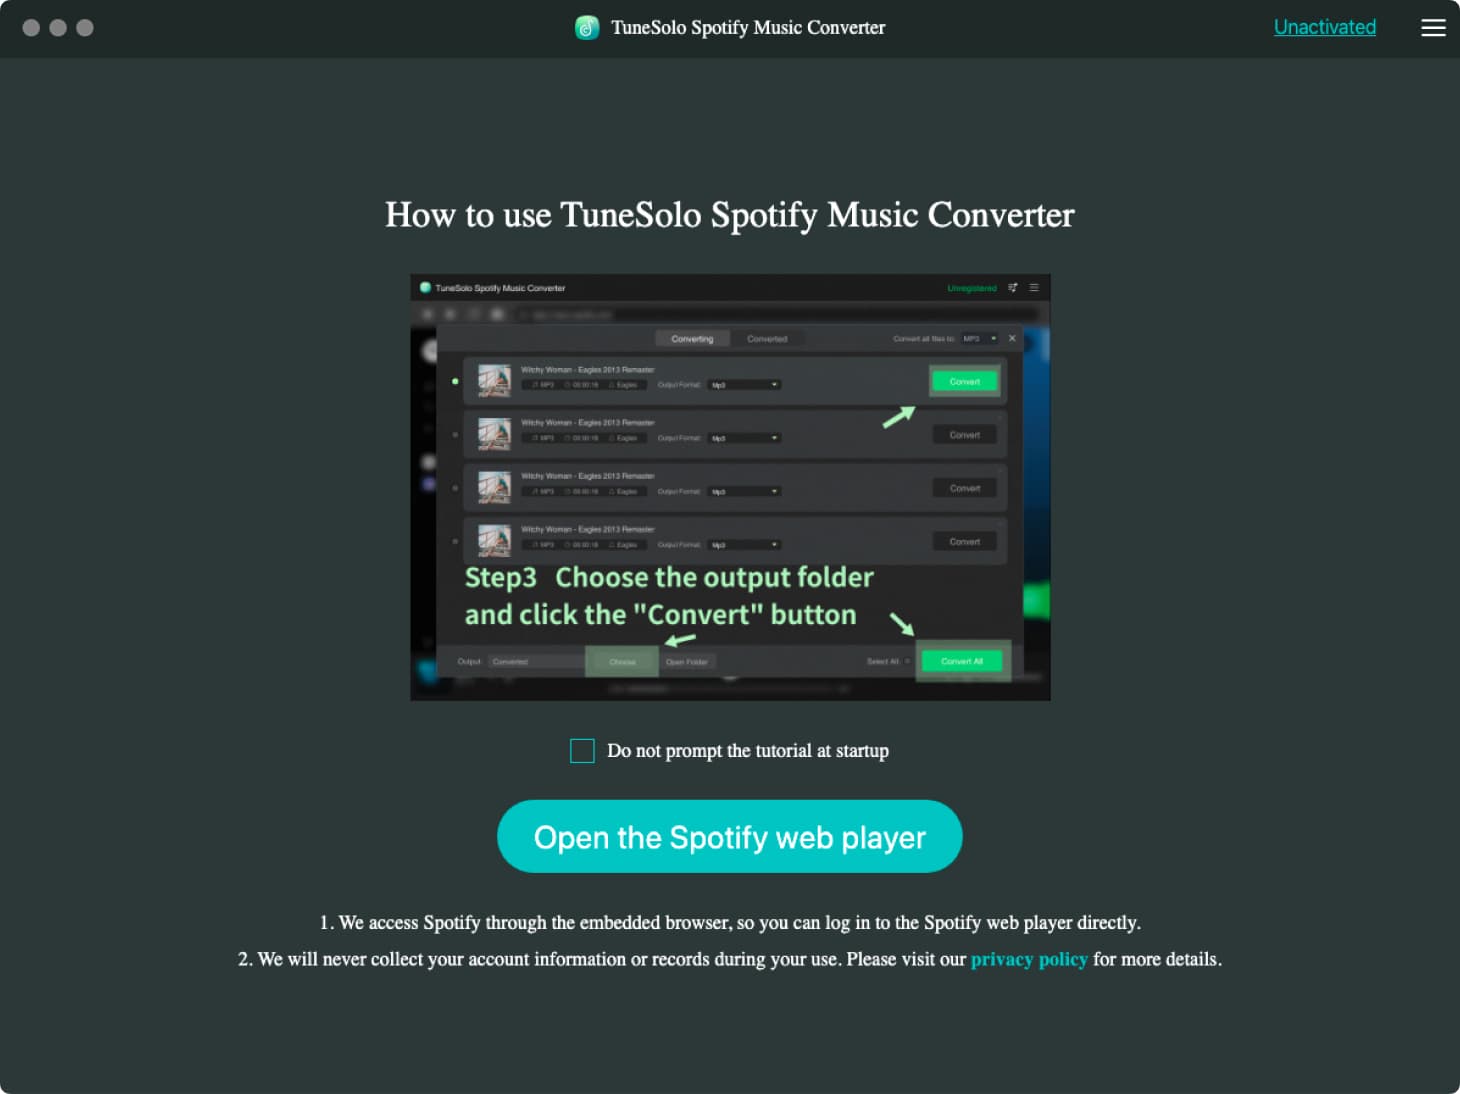 Open the Spotify Web Player in Tunesolo